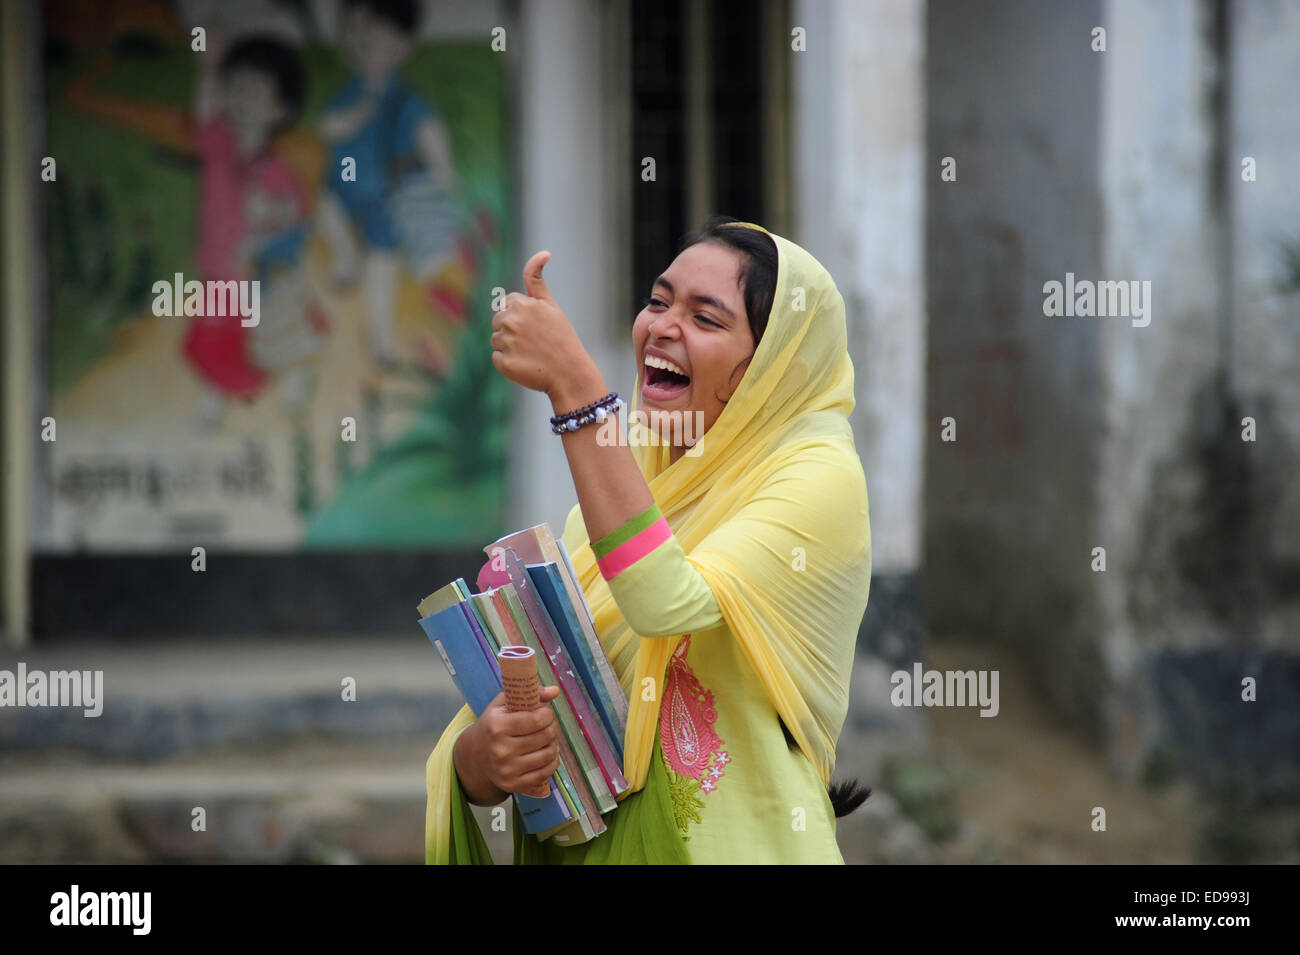 https://c8.alamy.com/comp/ED993J/a-bangladeshi-girl-shows-good-mark-with-her-finger-in-front-of-school-ED993J.jpg